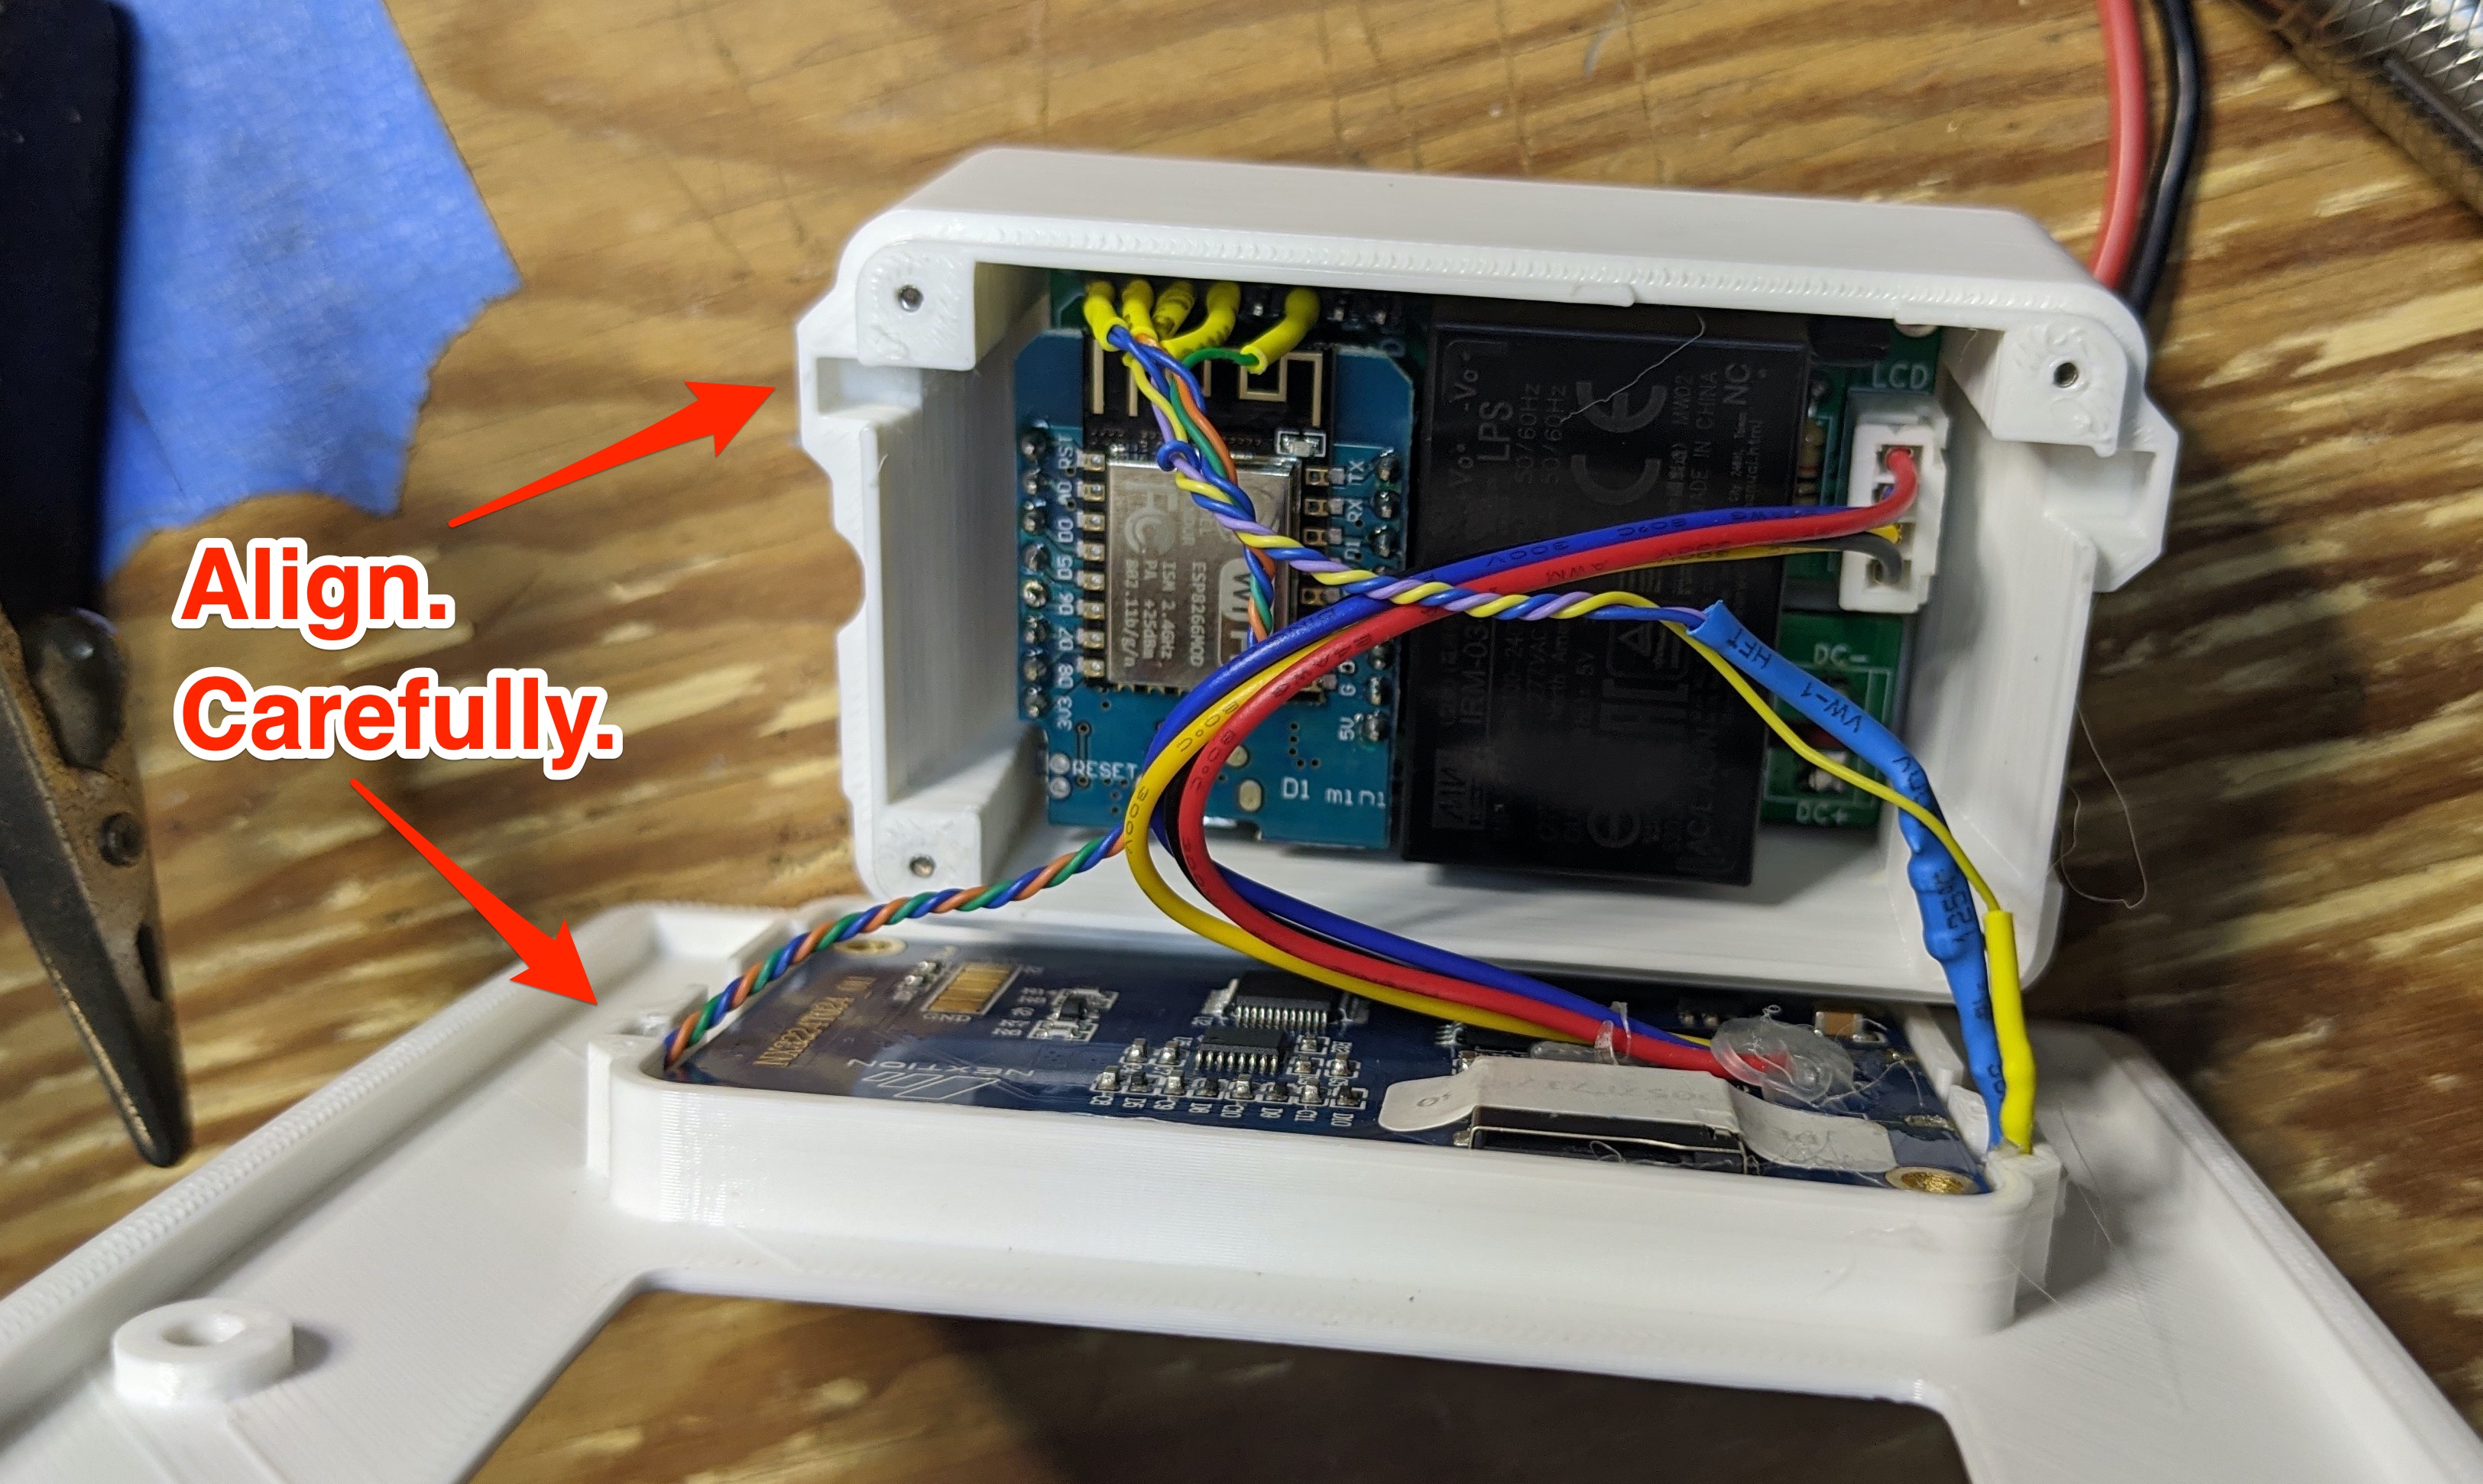 picture of finished assembly ready to be screwed together. Annotated to call attention to pinch points w/ wires